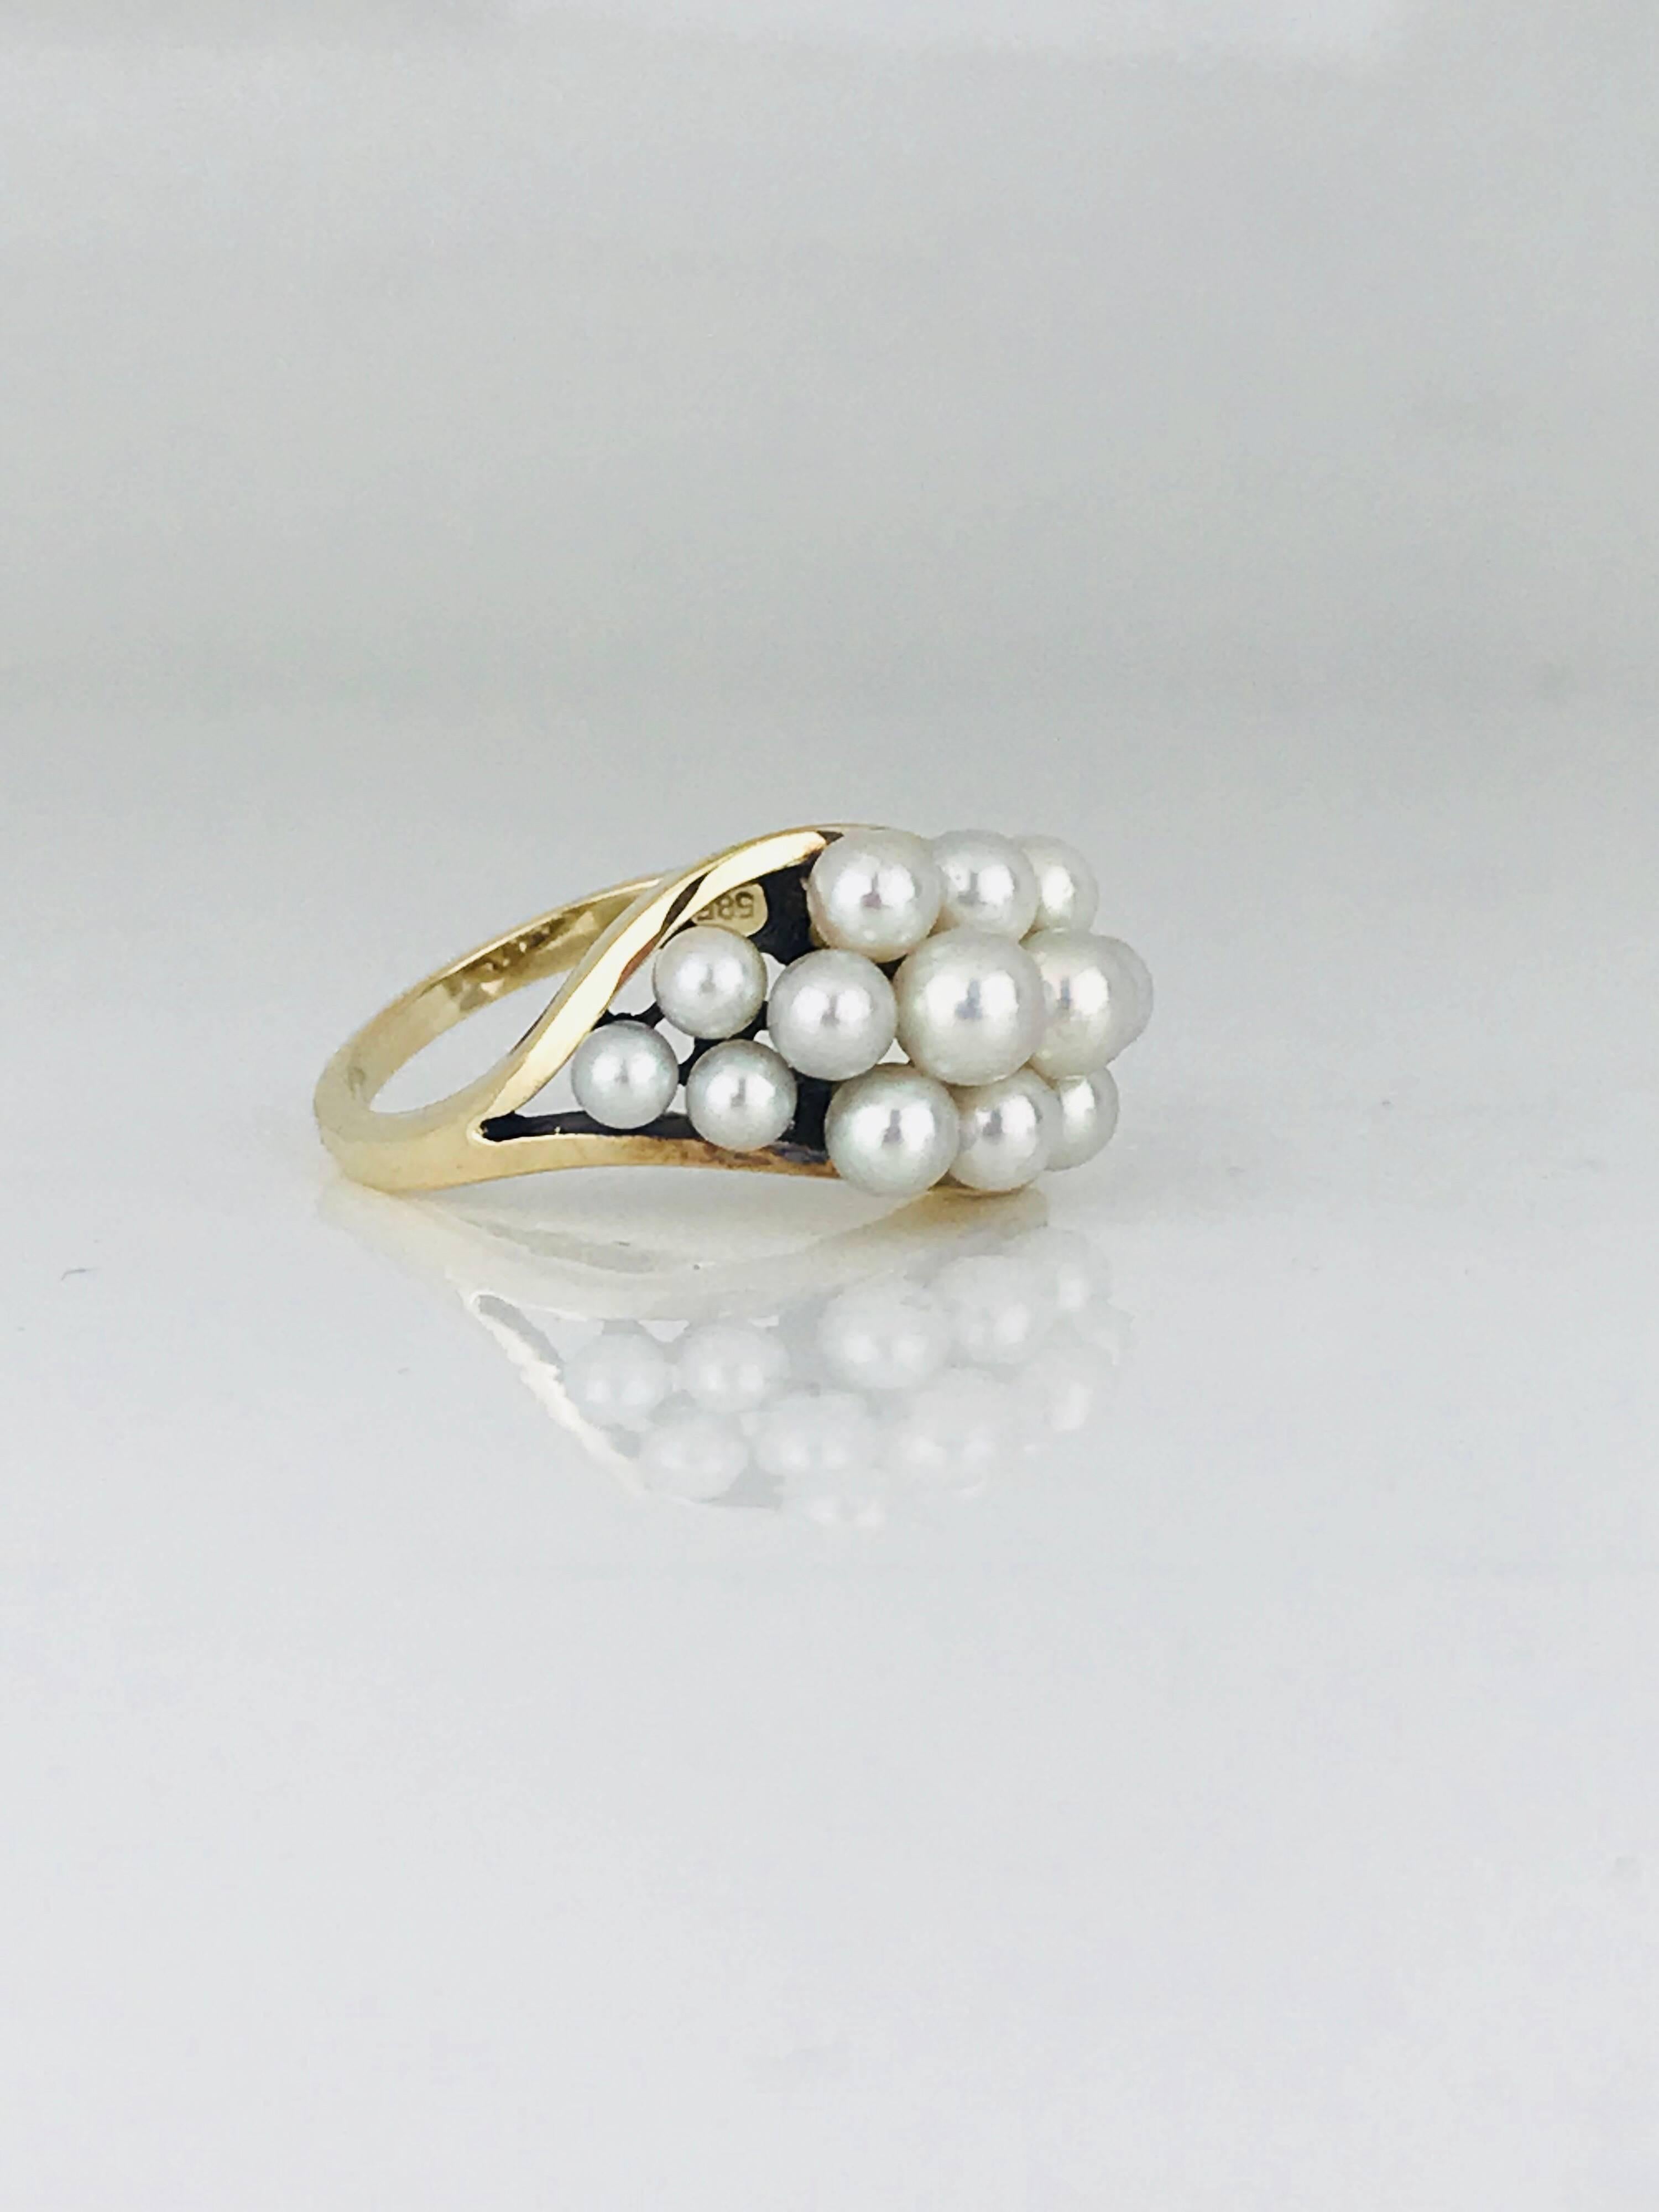  Lustrous, Mikimoto (16) white pearls of varying sizes are gracefully arranged in a tapered swirl on a highly polished 14 karat yellow gold ring.

Mikimoto pearls range in size from 3.0 mm to 5.5 millimeters.

Ring is a size 6.5.

GIA Gemologist